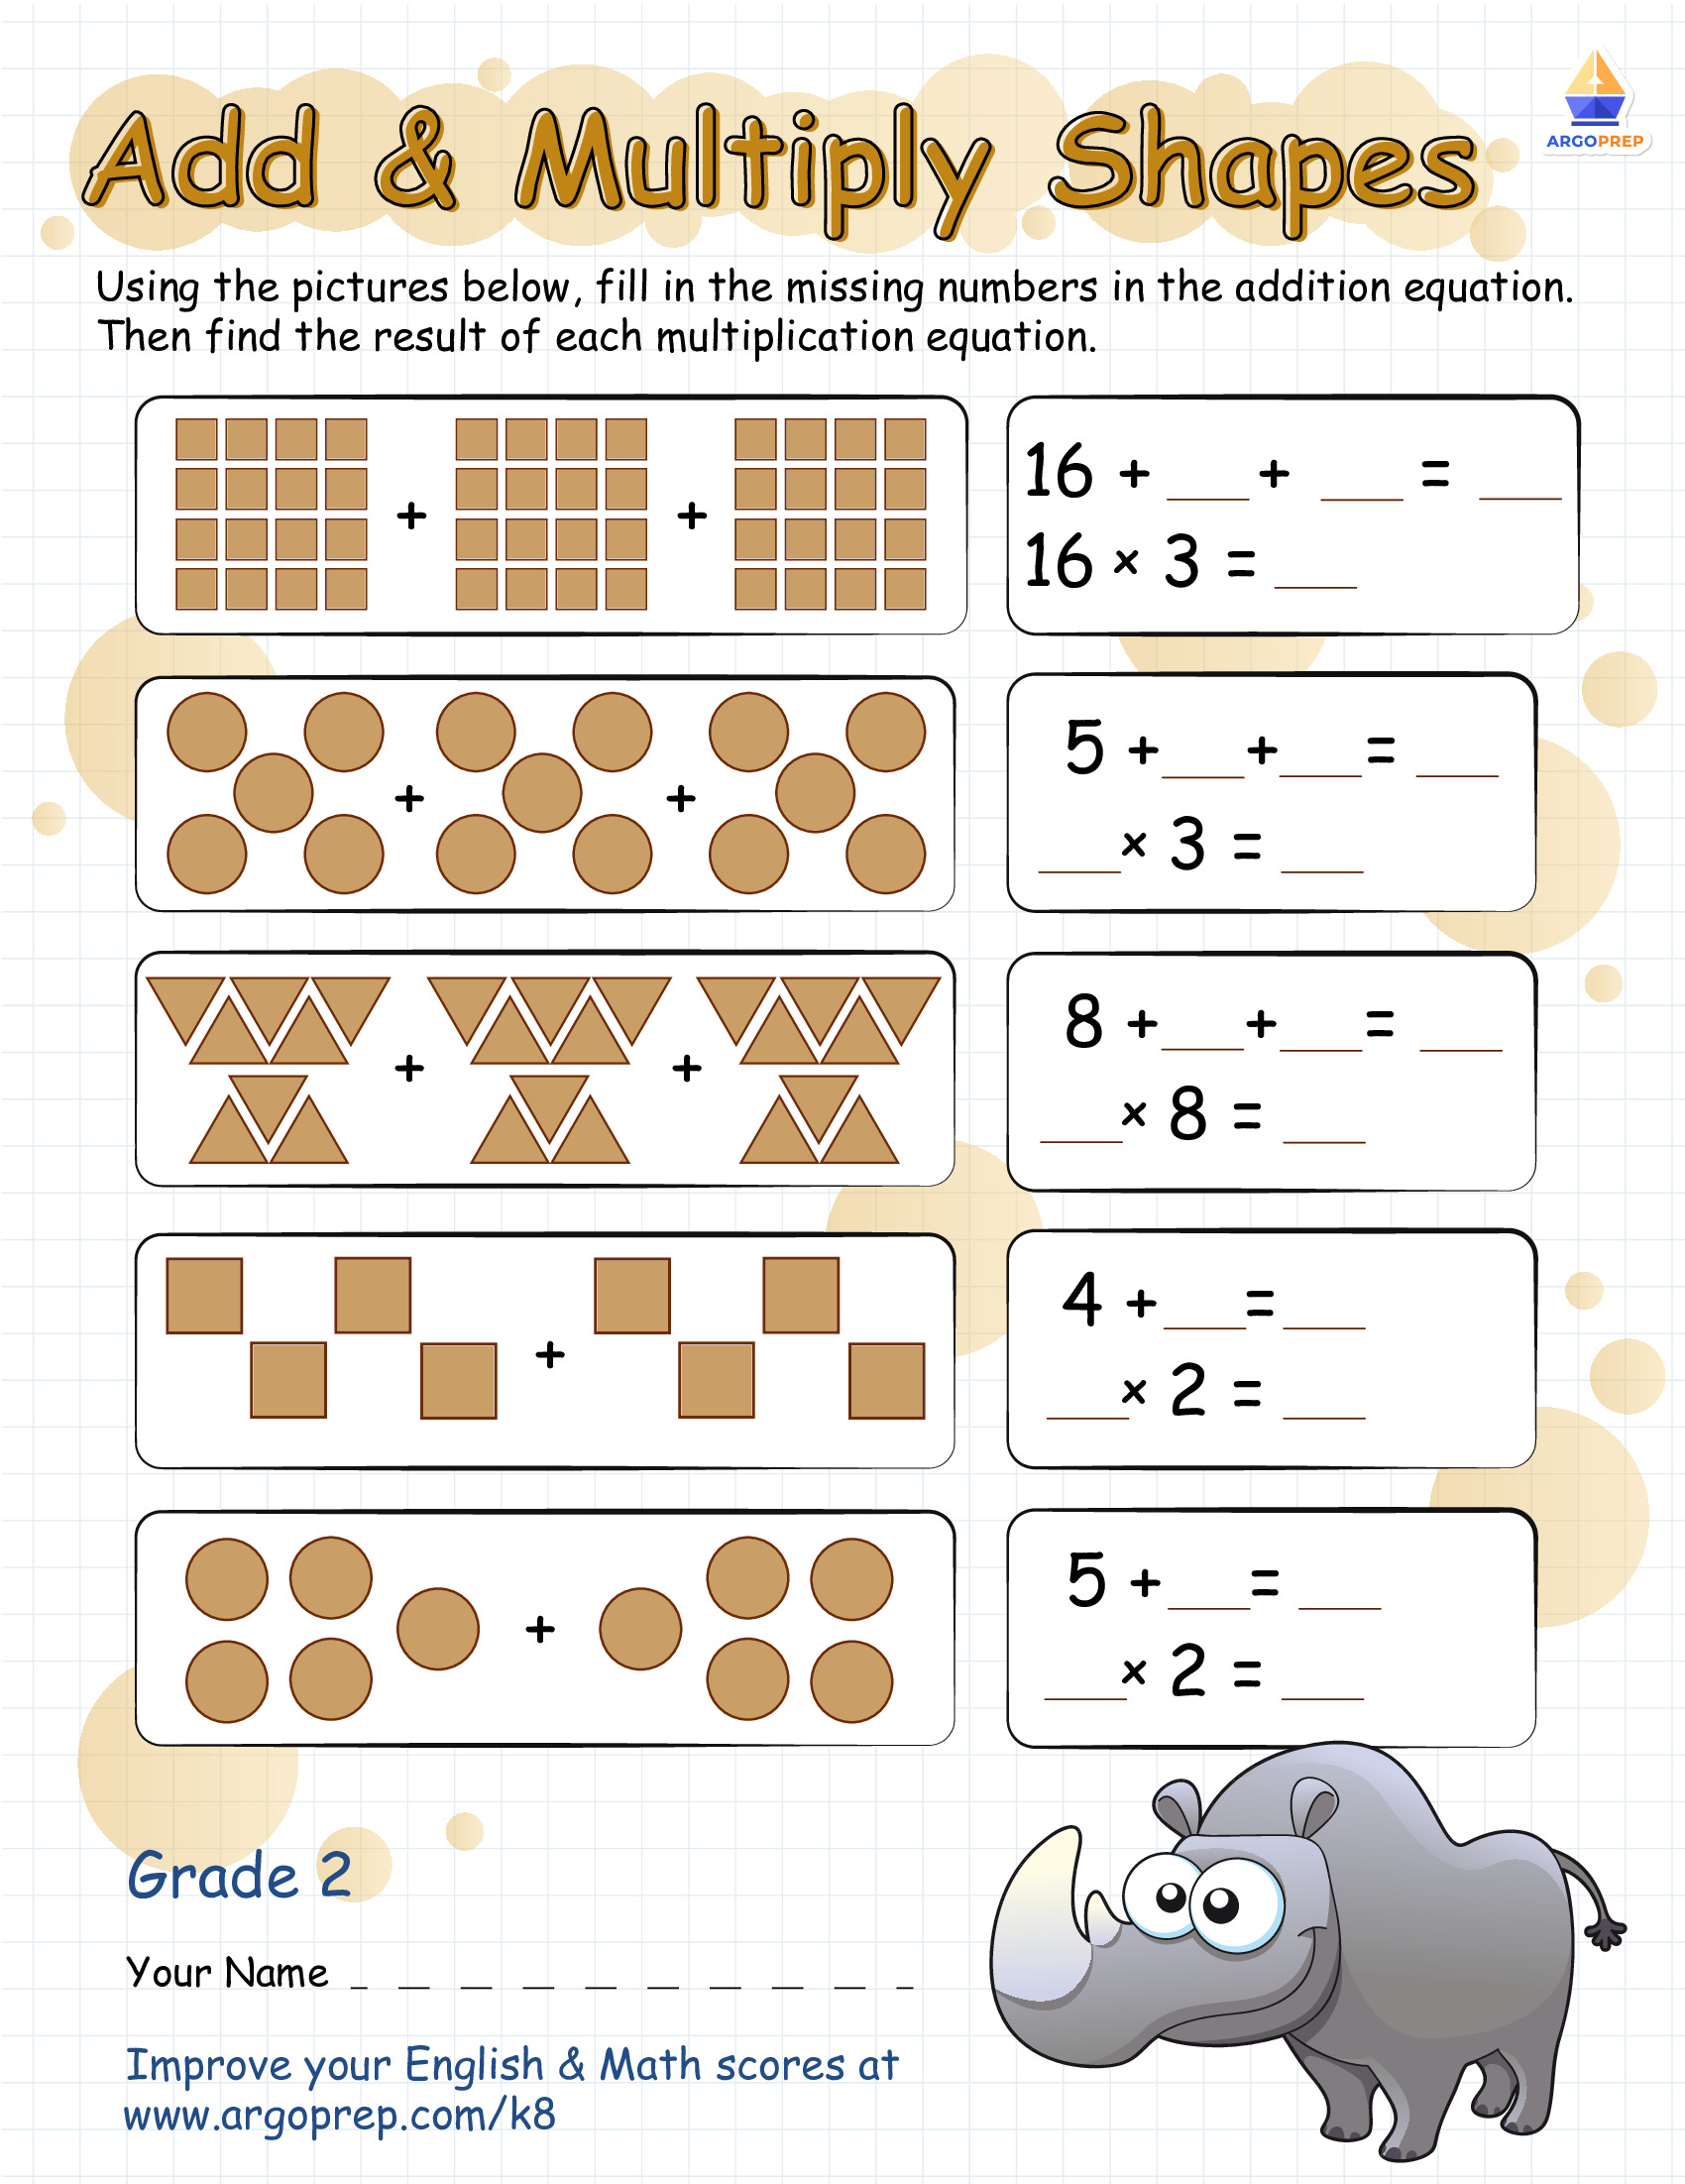 repeated addition with roger rhino argoprep